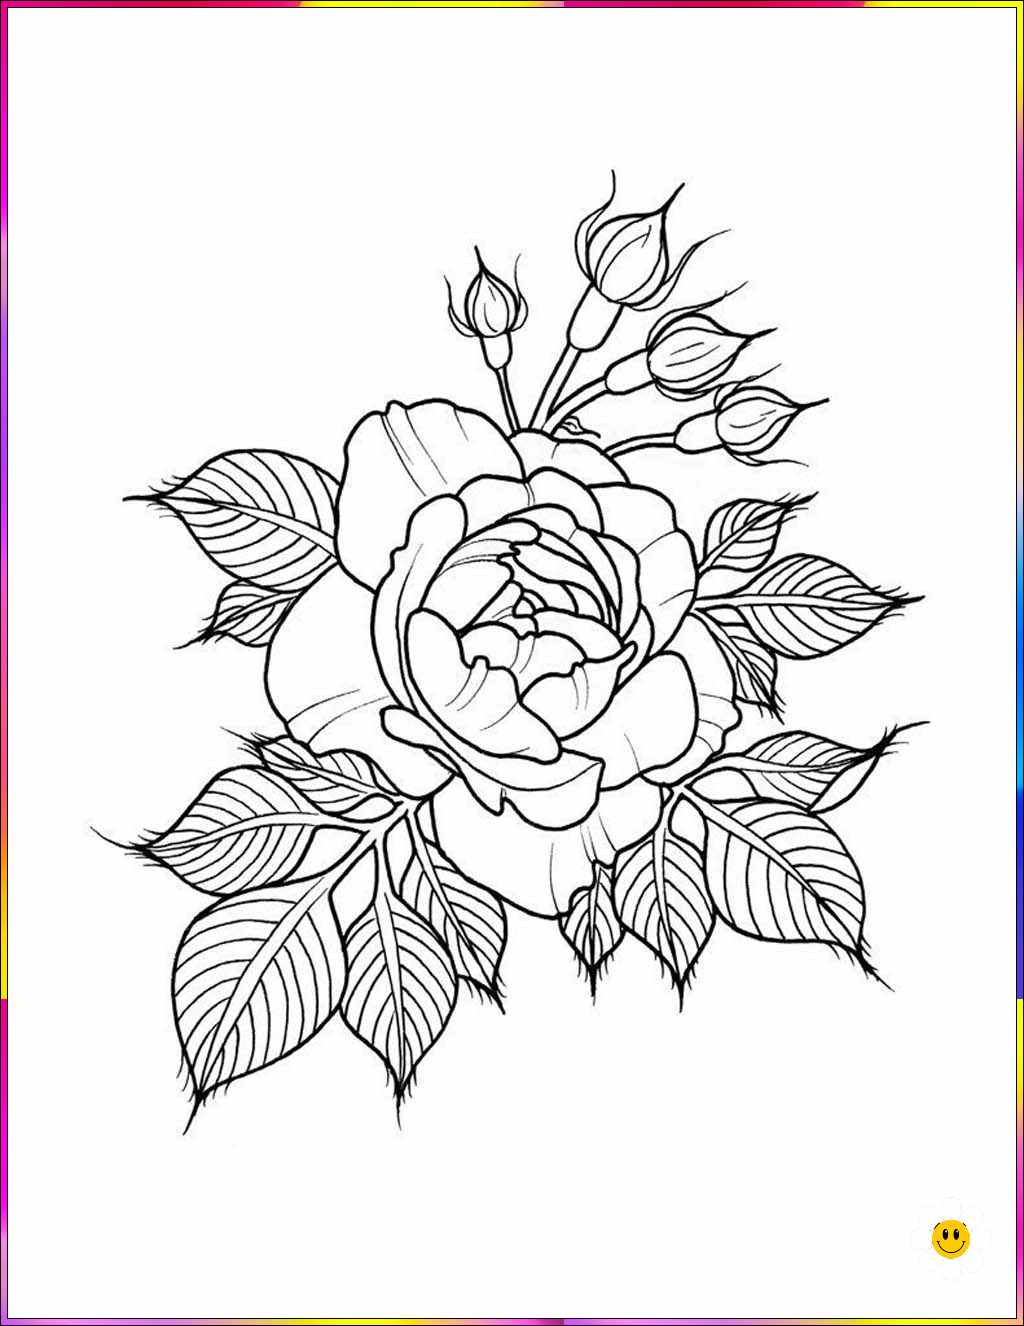 easy way to draw a flower
